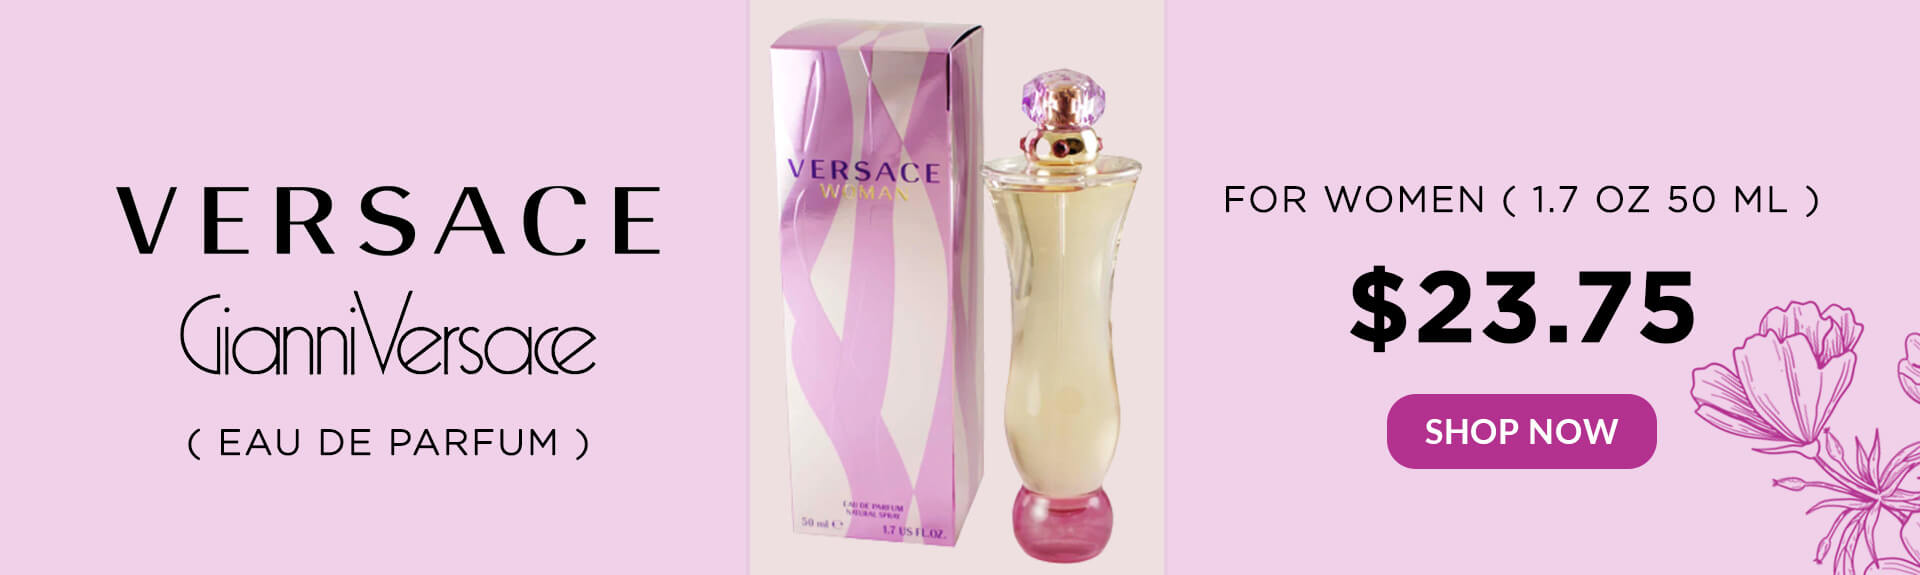 Versace by Gianni Versace for Women